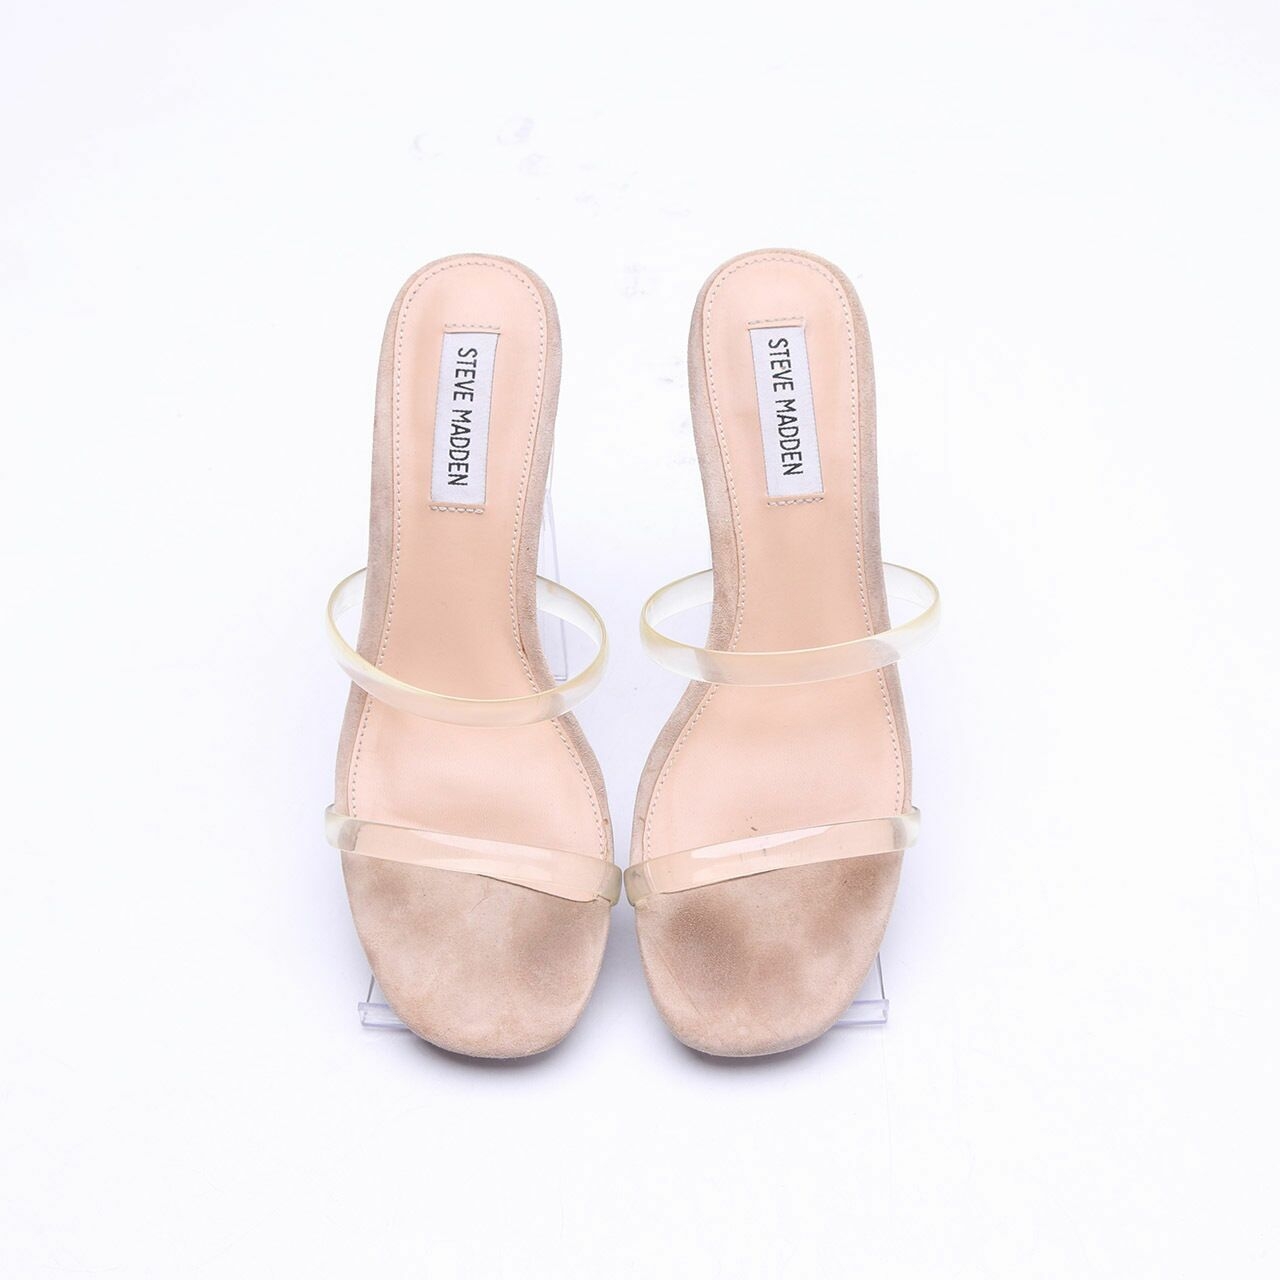 Steve Madden Cream Issy Clear Block Heel Strappy Sandals